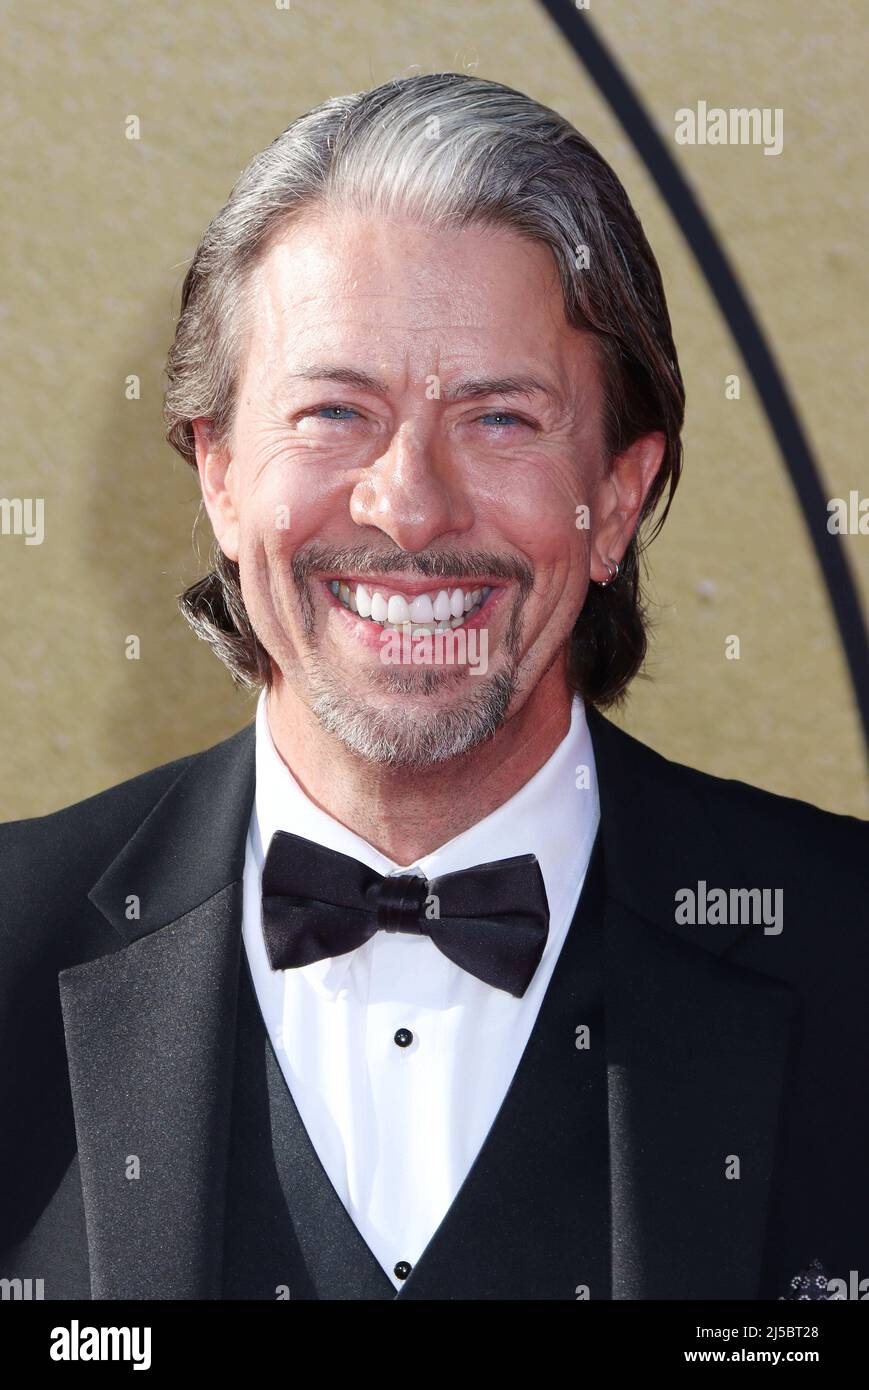 Hollywood, USA. 21st Apr, 2022. Sean Frye 2022/04/21 The 40th Anniversary Screening of “E.T. the Extra-Terrestrial” held at TCL Chinese Theatre in Hollywood, CA Photo by Kazuki Hirata/Hollywood News Wire Inc. Credit: Hollywood News Wire Inc./Alamy Live News Stock Photo